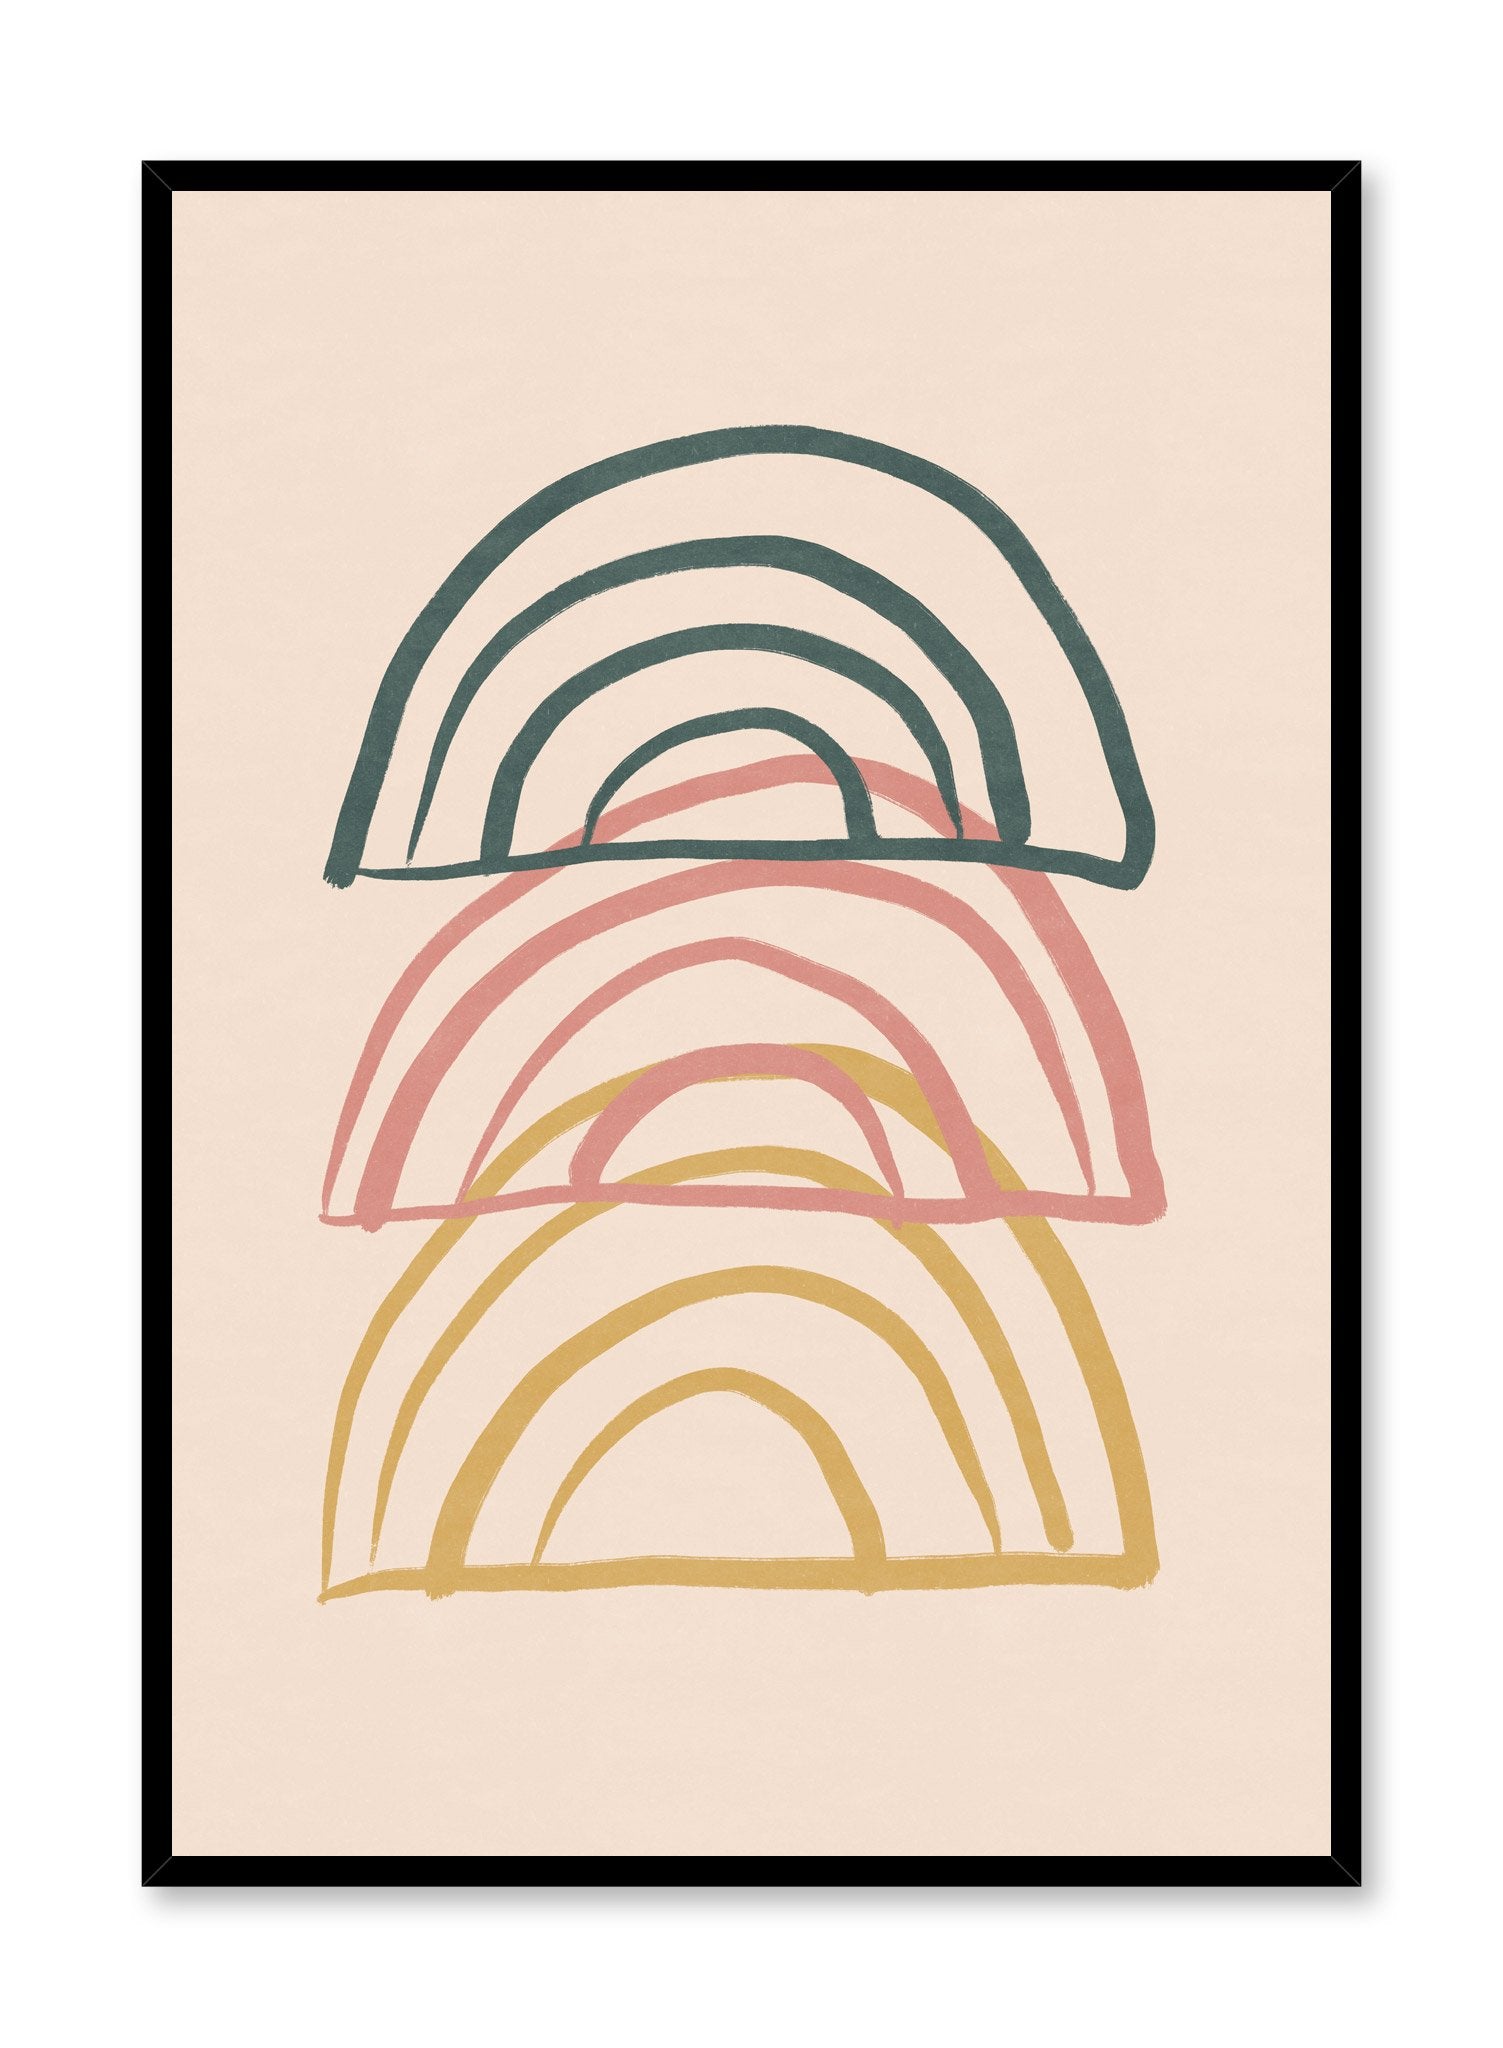 Modern minimalist poster by Opposite Wall with abstract design of Deconstructed Rainbow by Toffie Affichiste